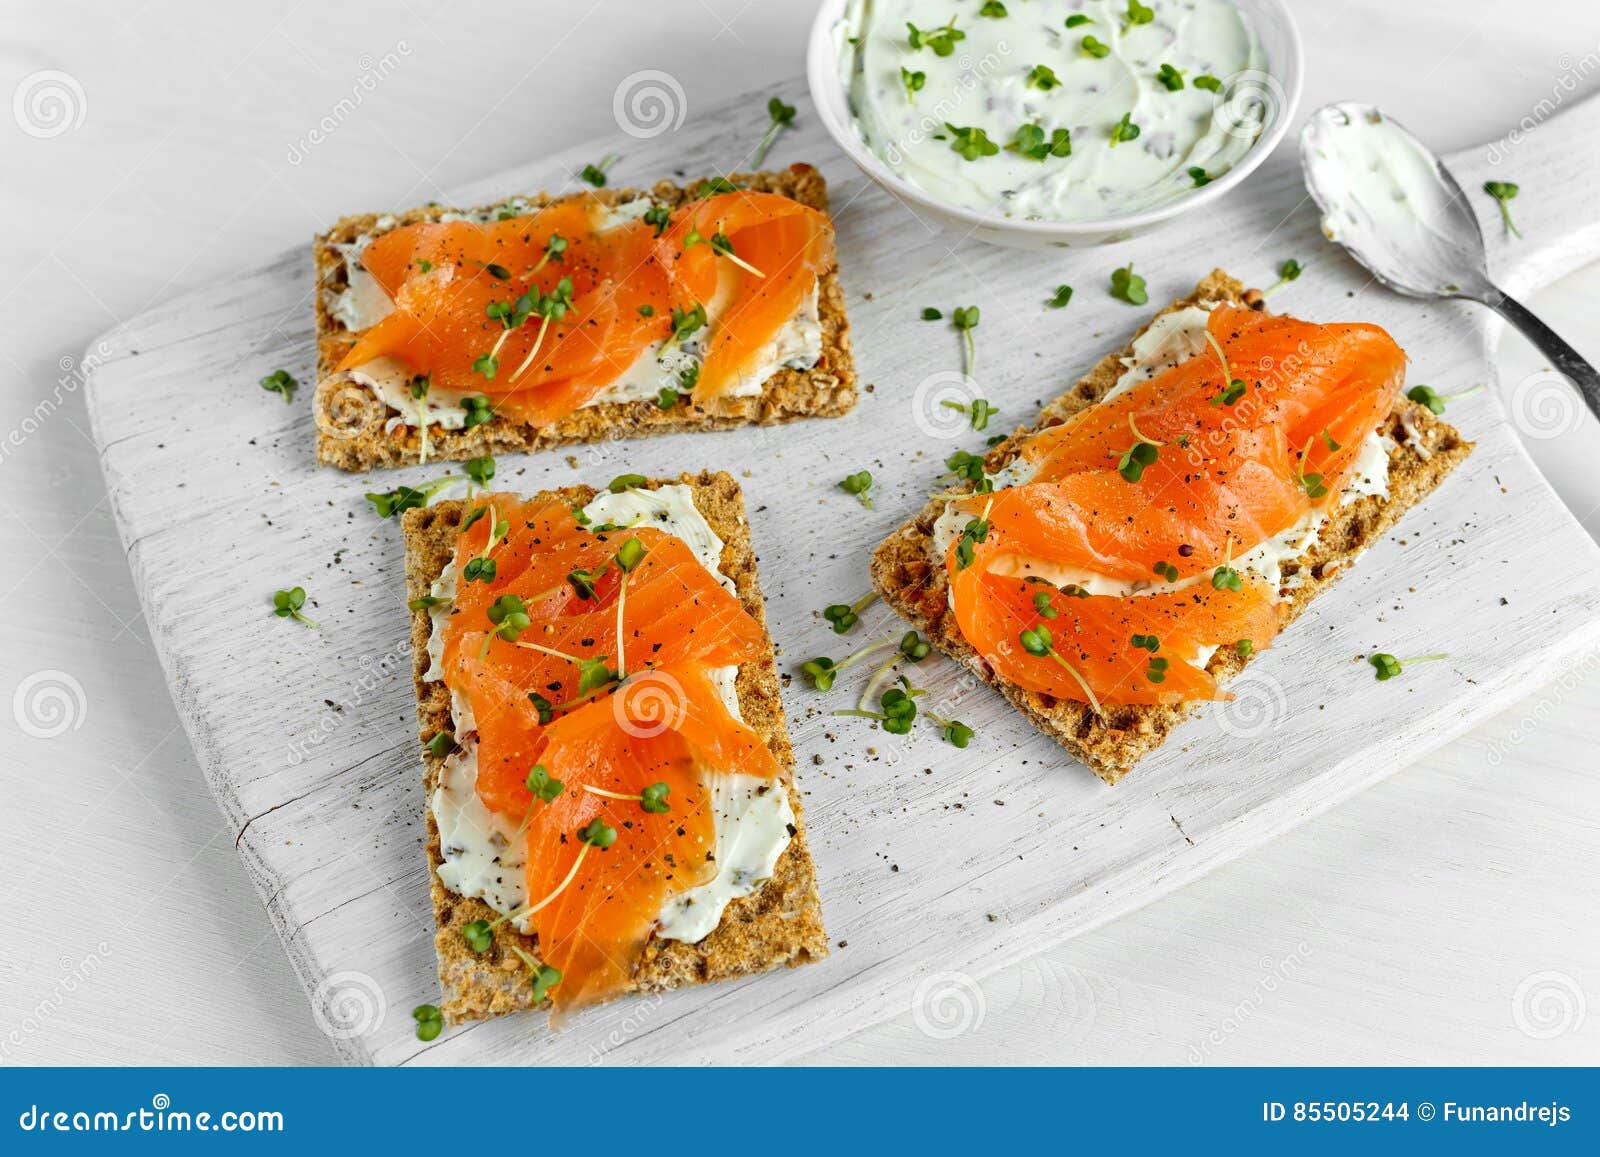 Homemade Crispbread Toast With Smoked Salmon Melted Cheese And Cress Salad On White Wooden Board Stock Photo Image Of Board Breakfast 85505244